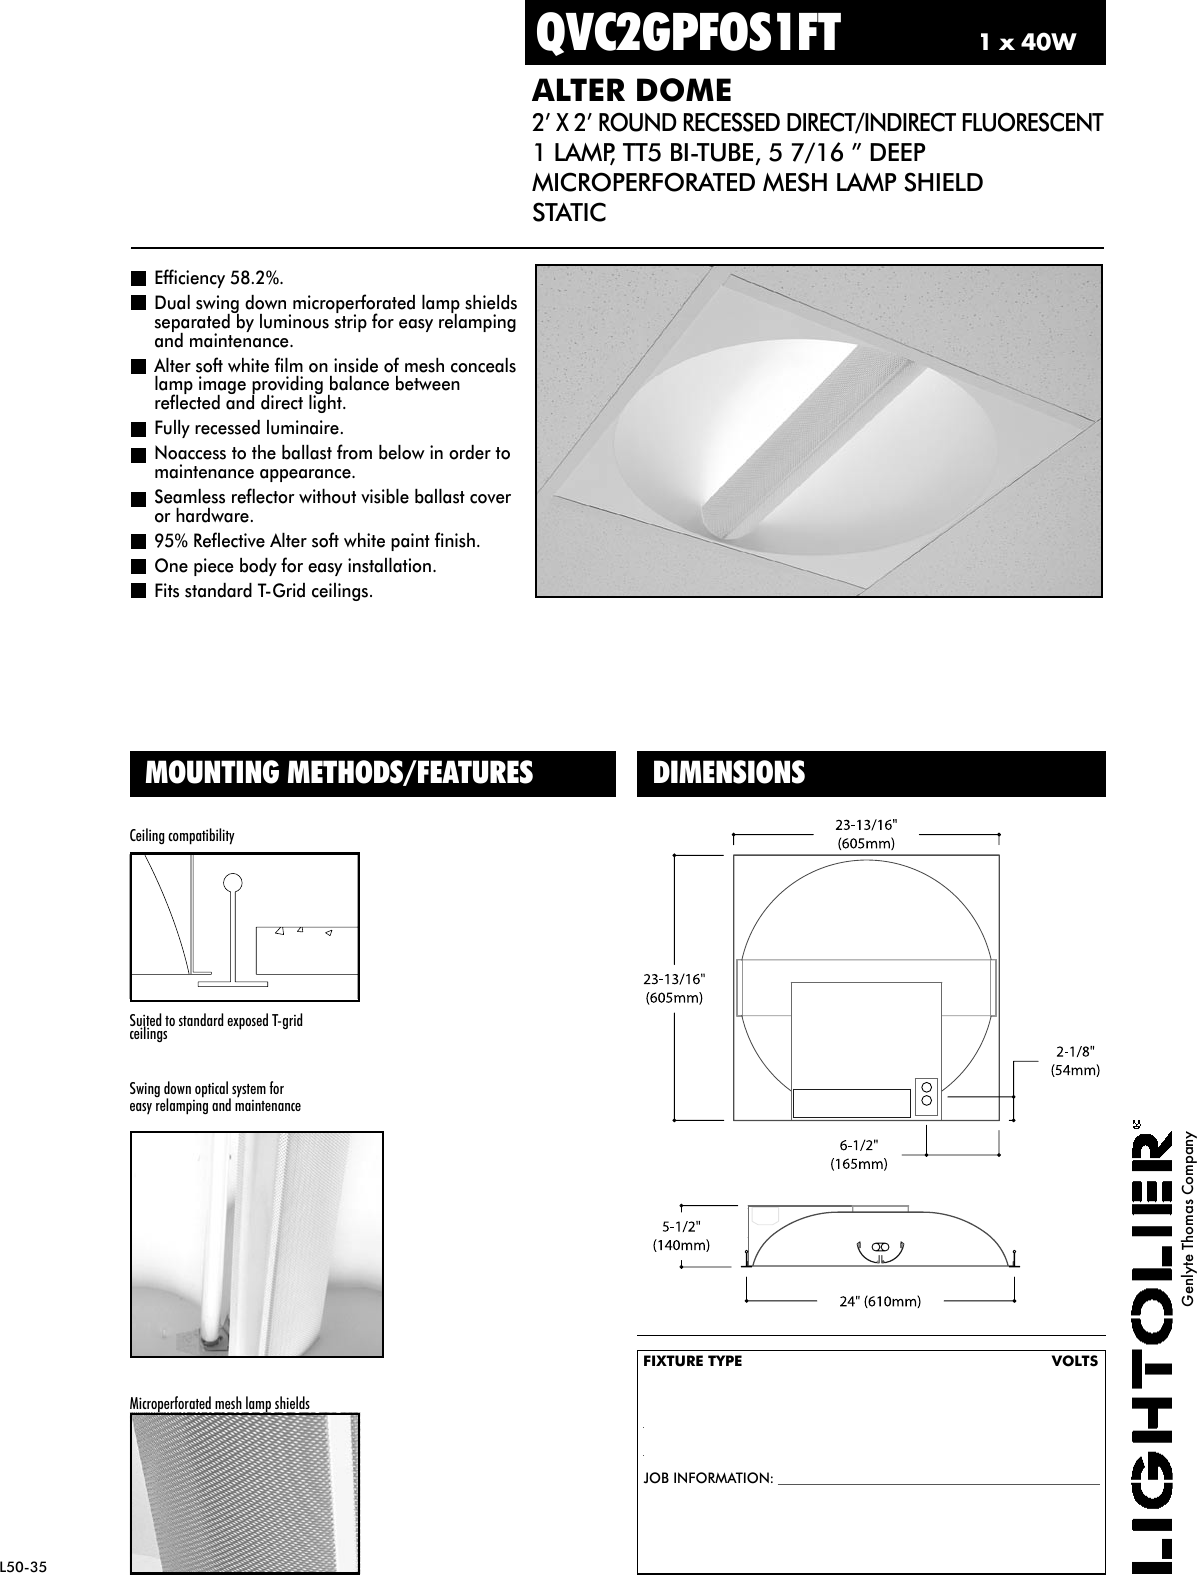 Page 1 of 2 - Lightolier Lightolier-Alter-Dome-Qvc2Gpfos1Ft-Users-Manual- L50-35  Lightolier-alter-dome-qvc2gpfos1ft-users-manual